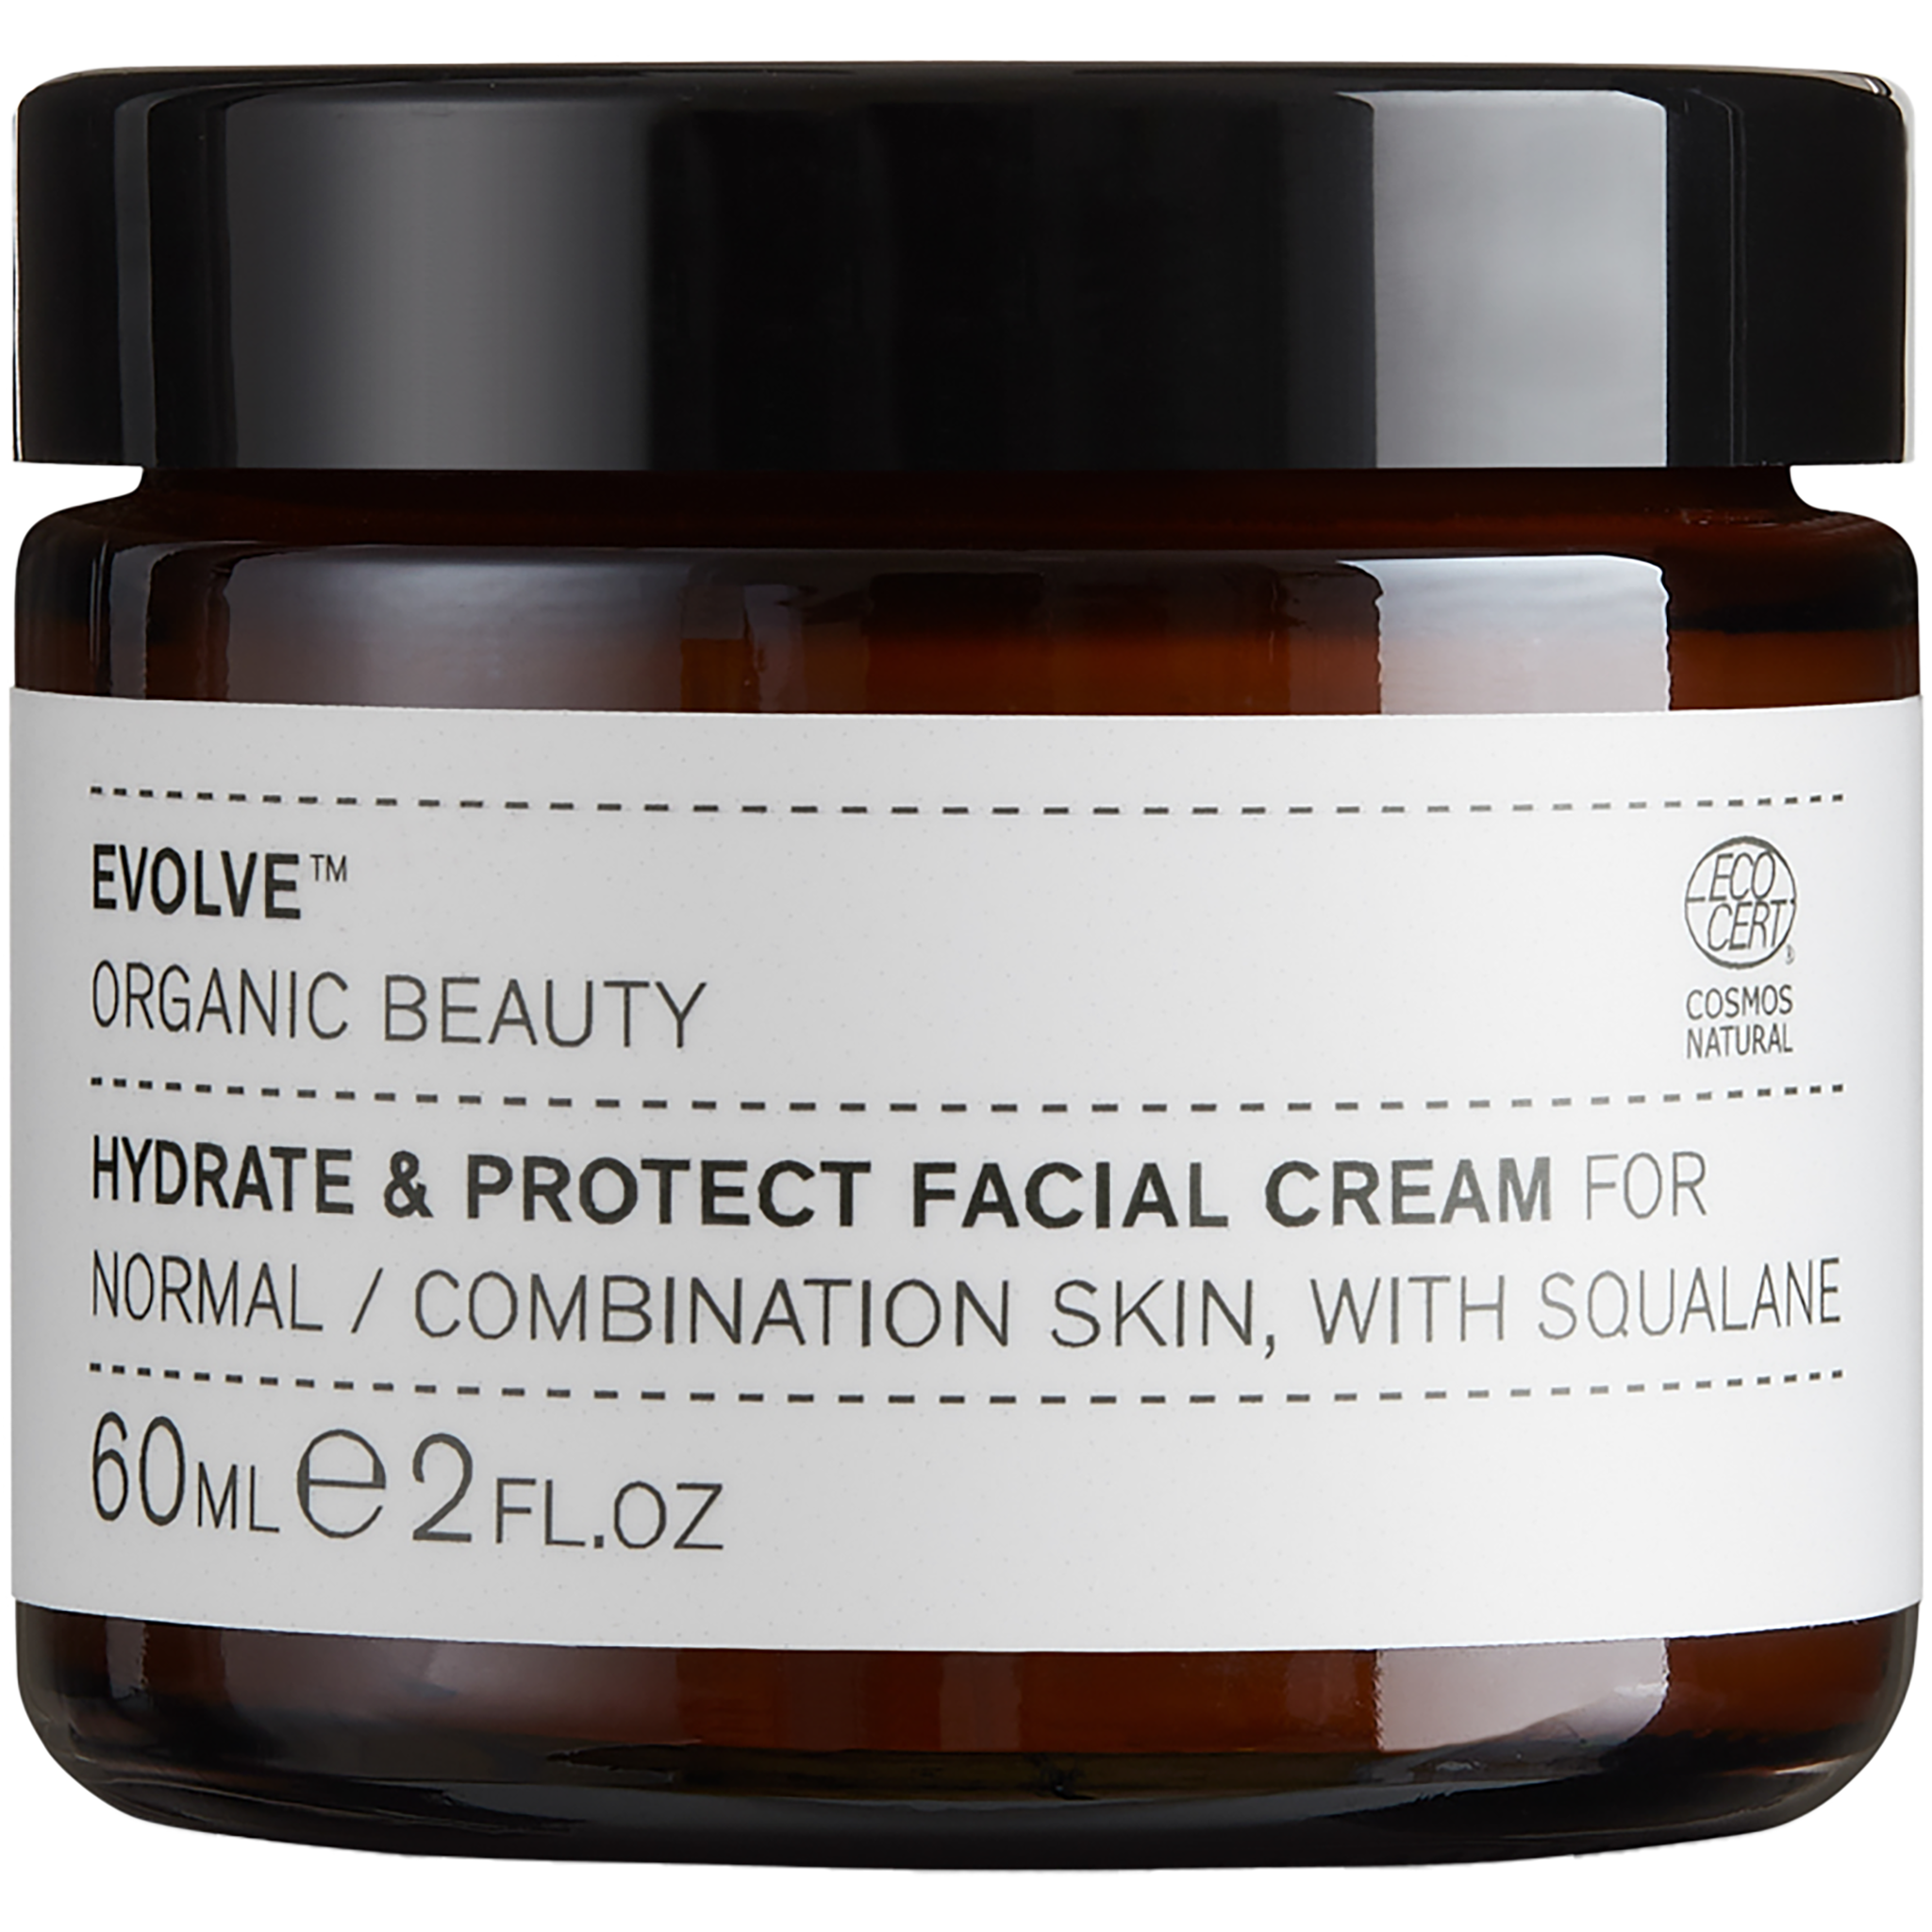 -NEW Hydrate & Protect Facial Cream